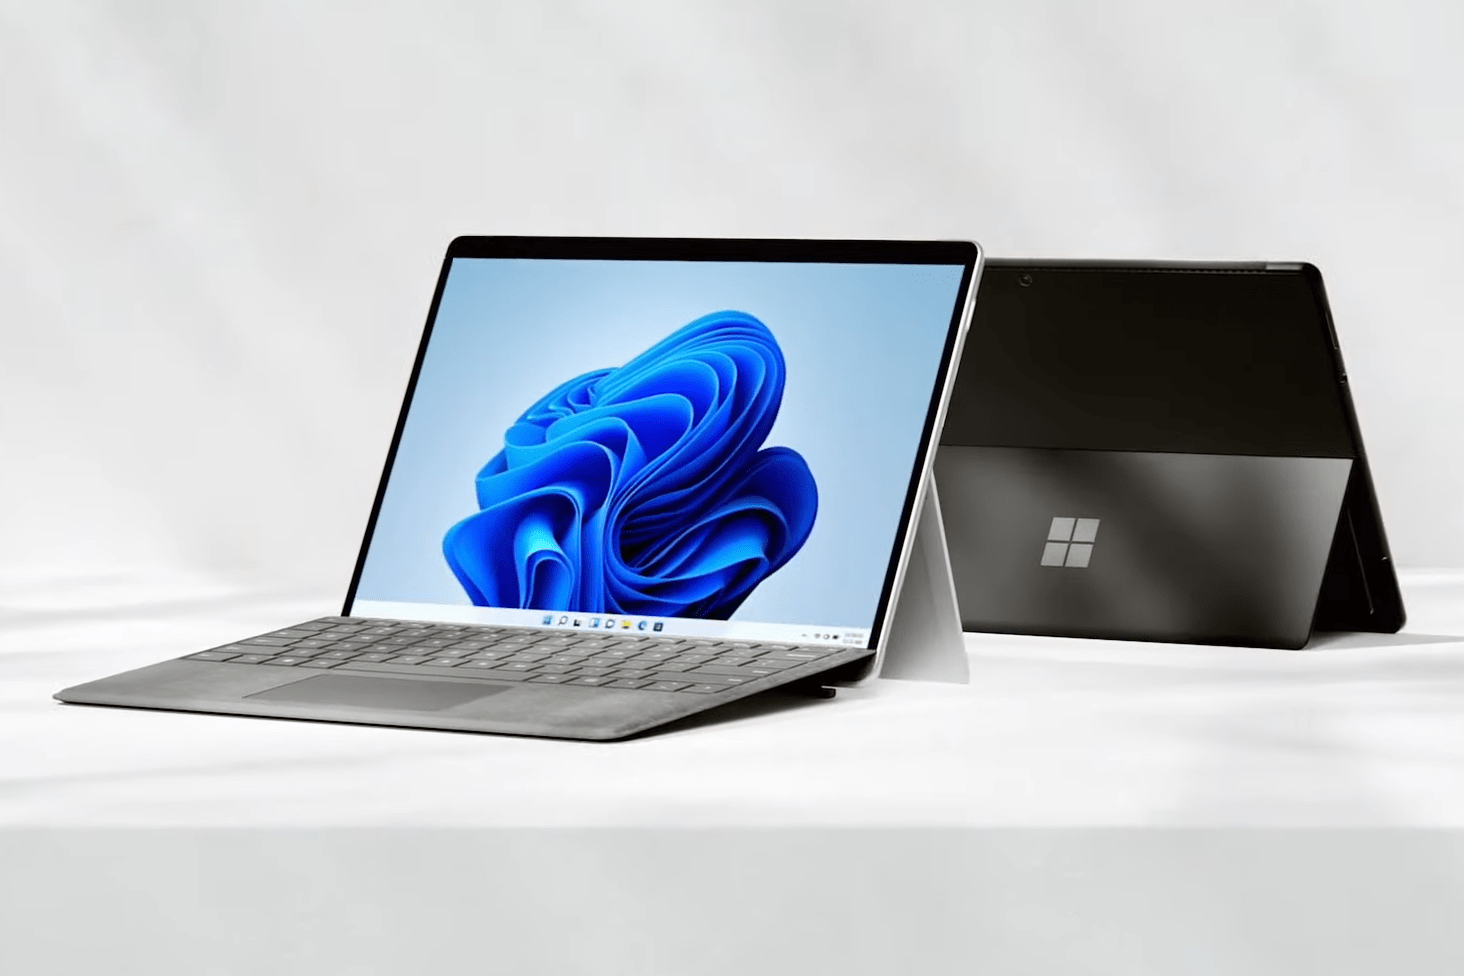 Microsoft Surface Pro 8 - 11th generation Intel chips, 120Hz screen and Thunderbolt 4 starting at $1,099